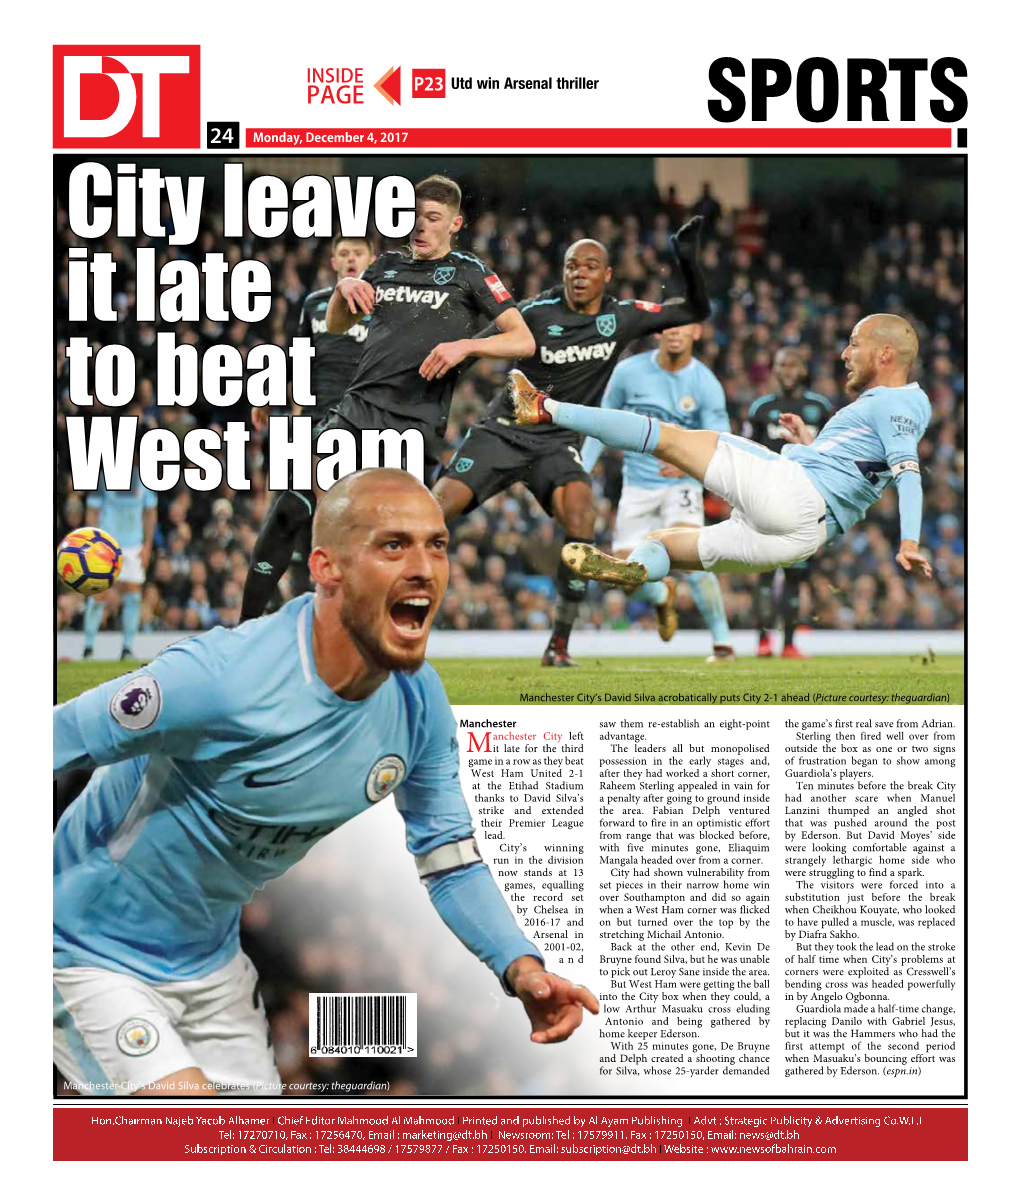 SPORTS 2424 Monday, December 4, 2017 City Leave It Late to Beat West Ham